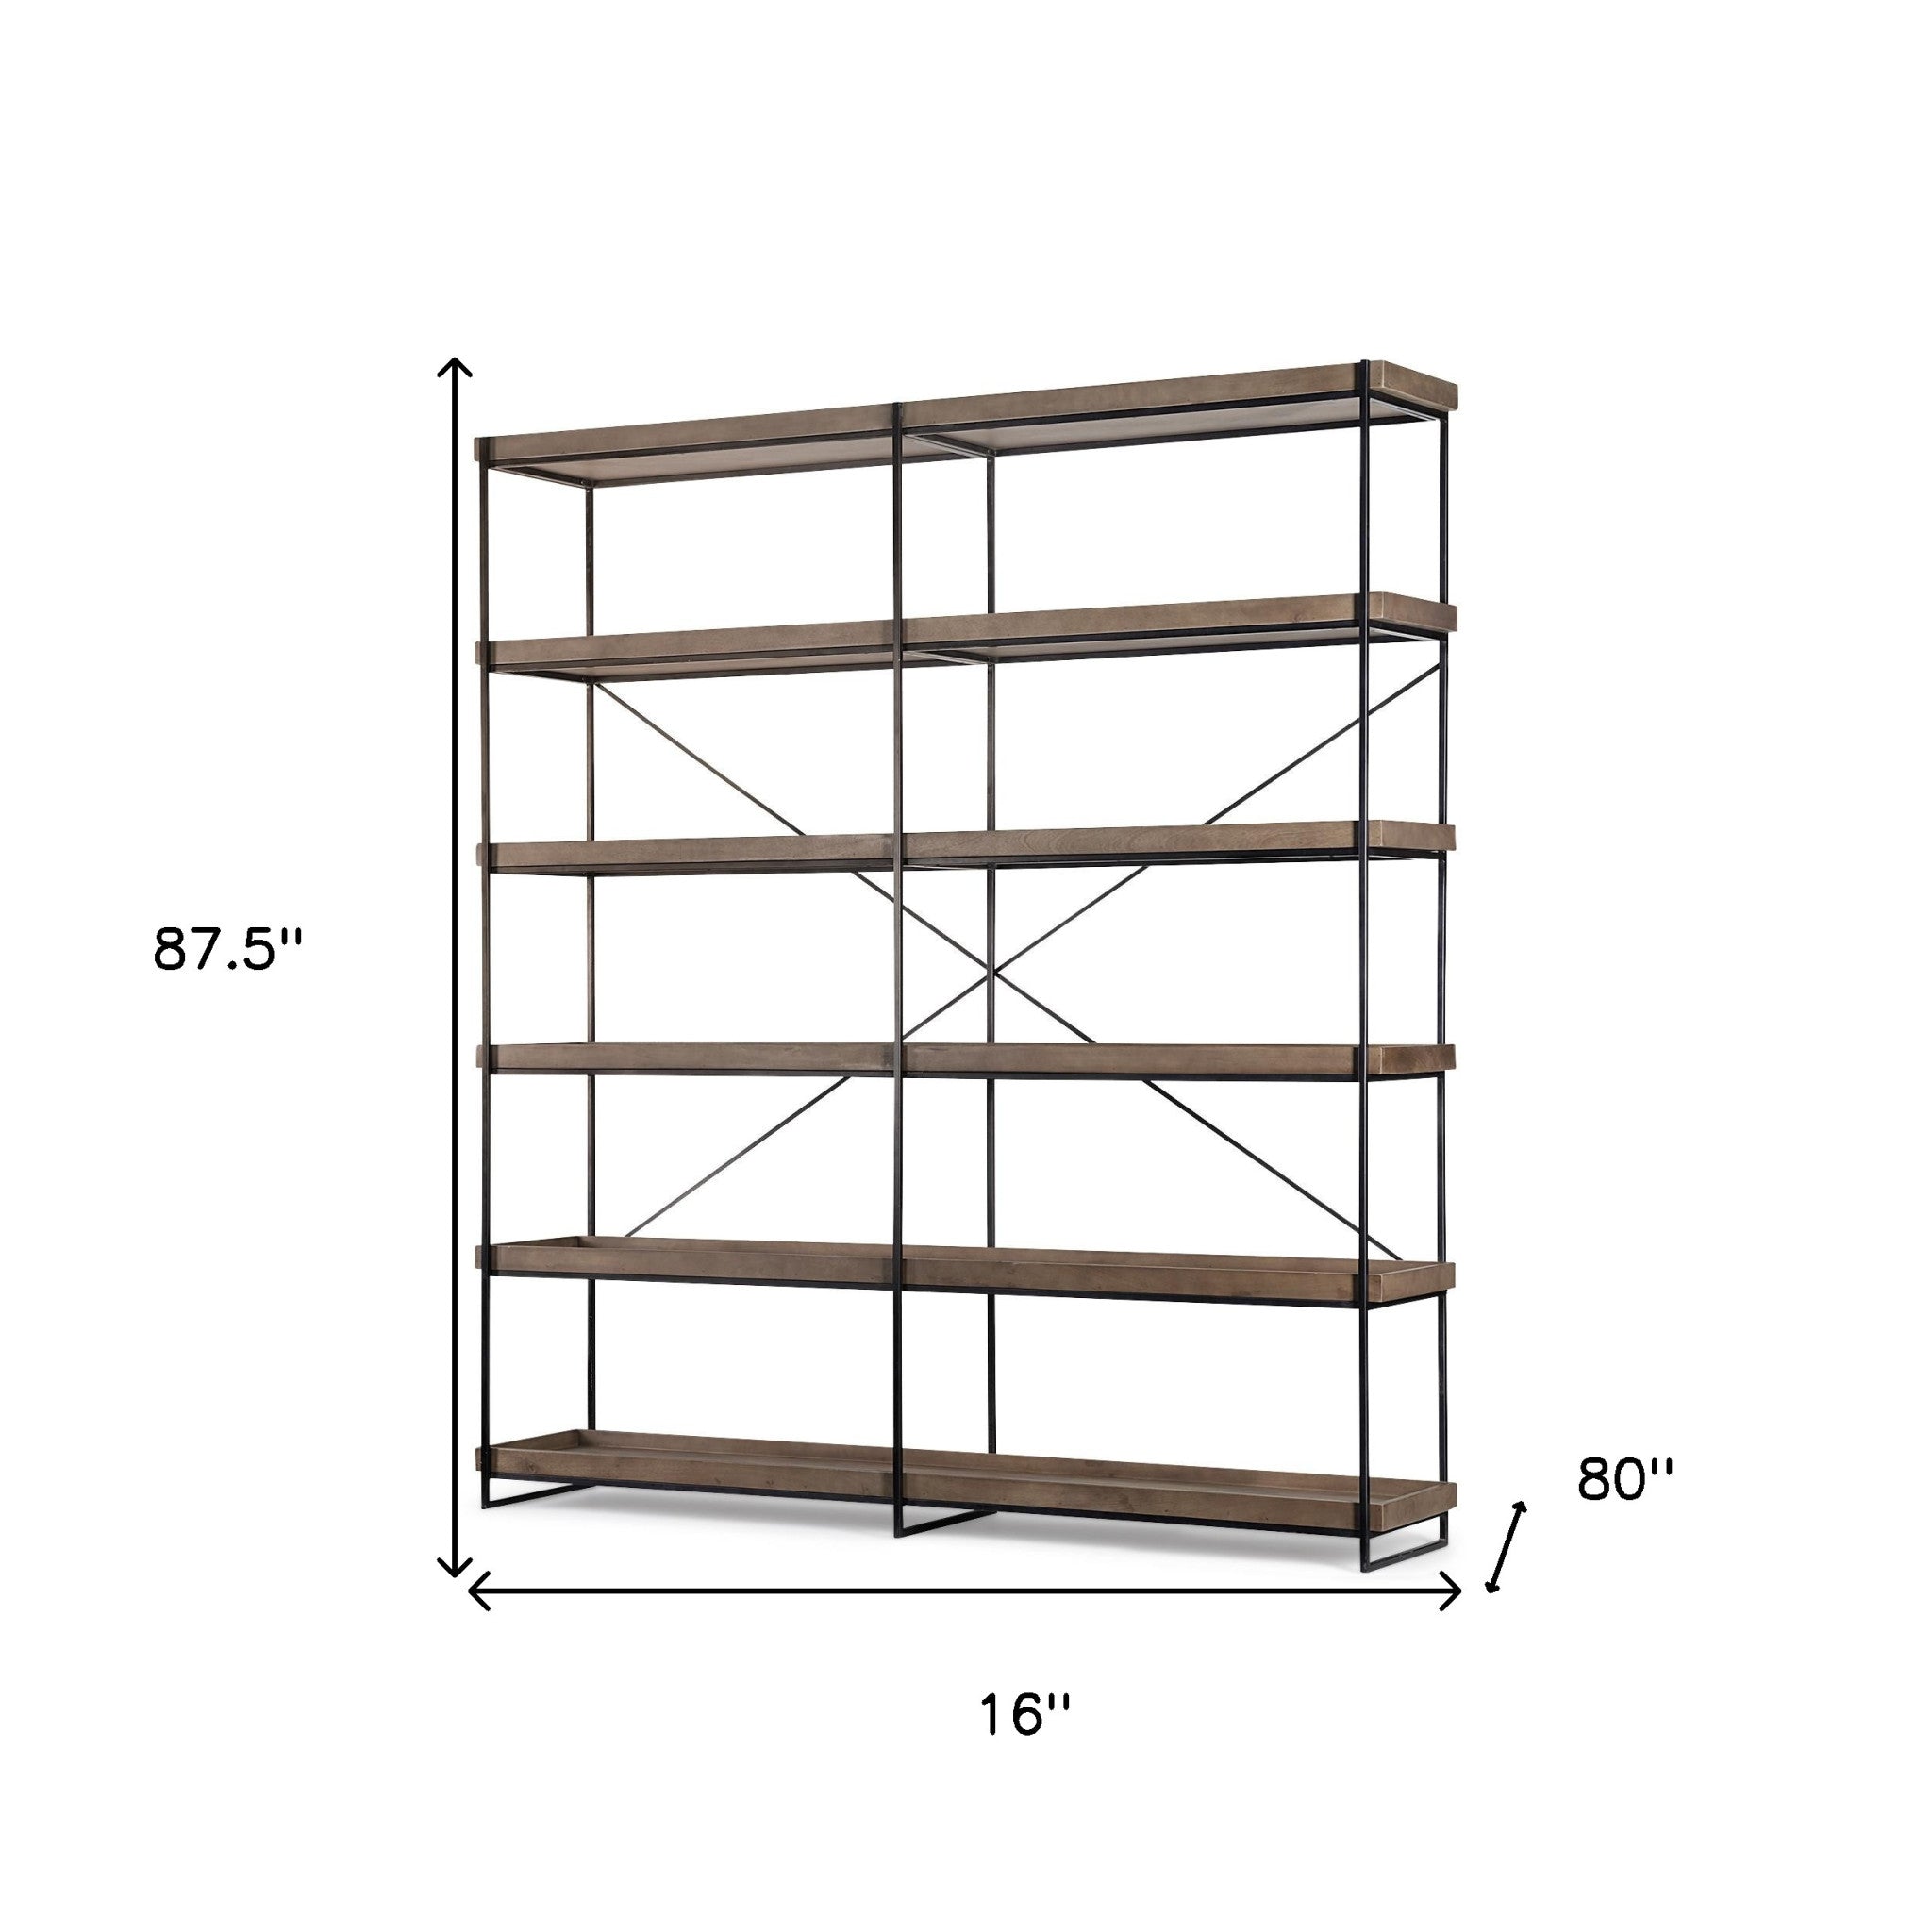 Medium Brown Wood And Iron Shelving Unit With 5 Tray Shelves